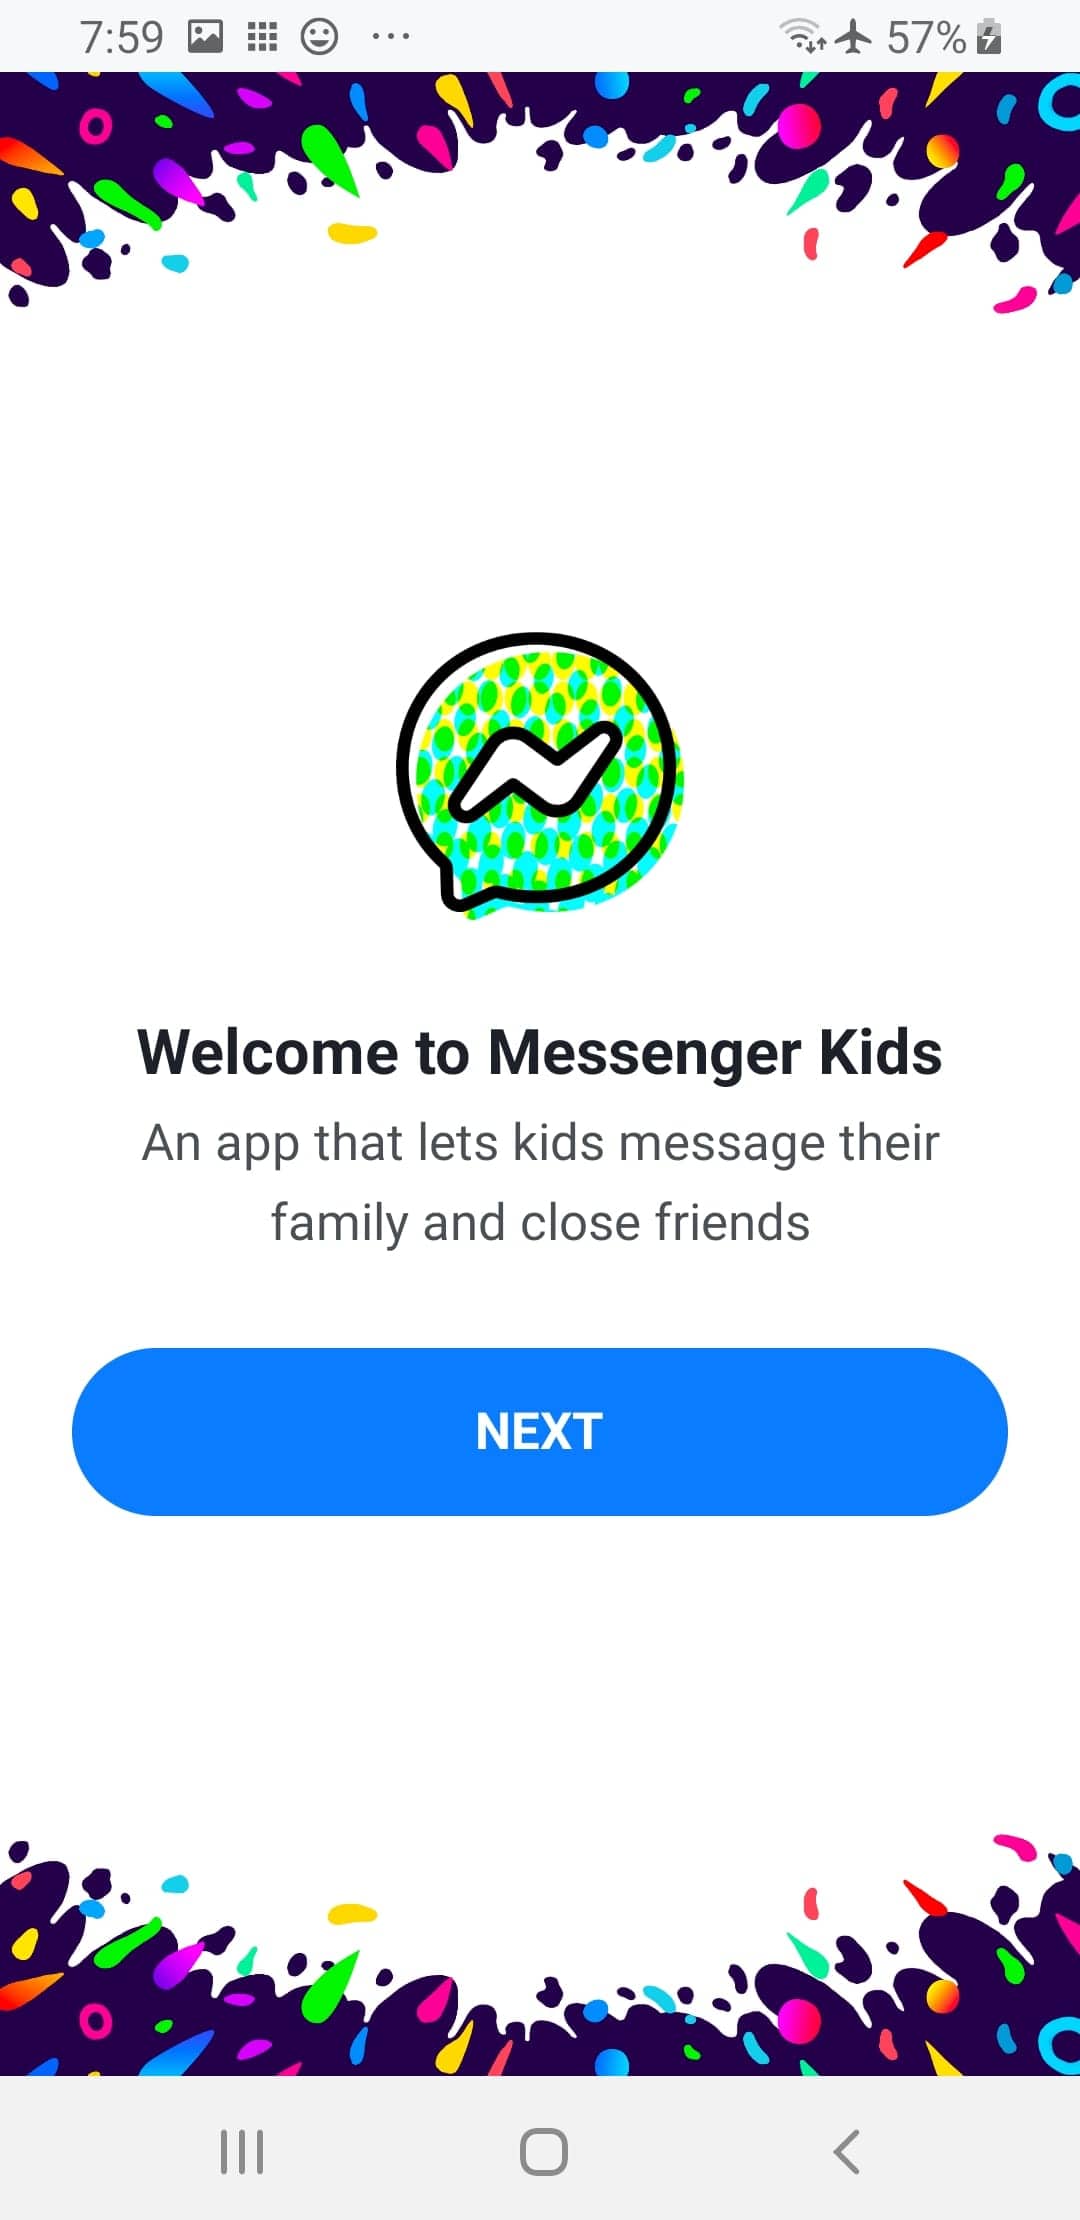 Screenshot From Our Messenger Kids - The Messaging App For Kids Review